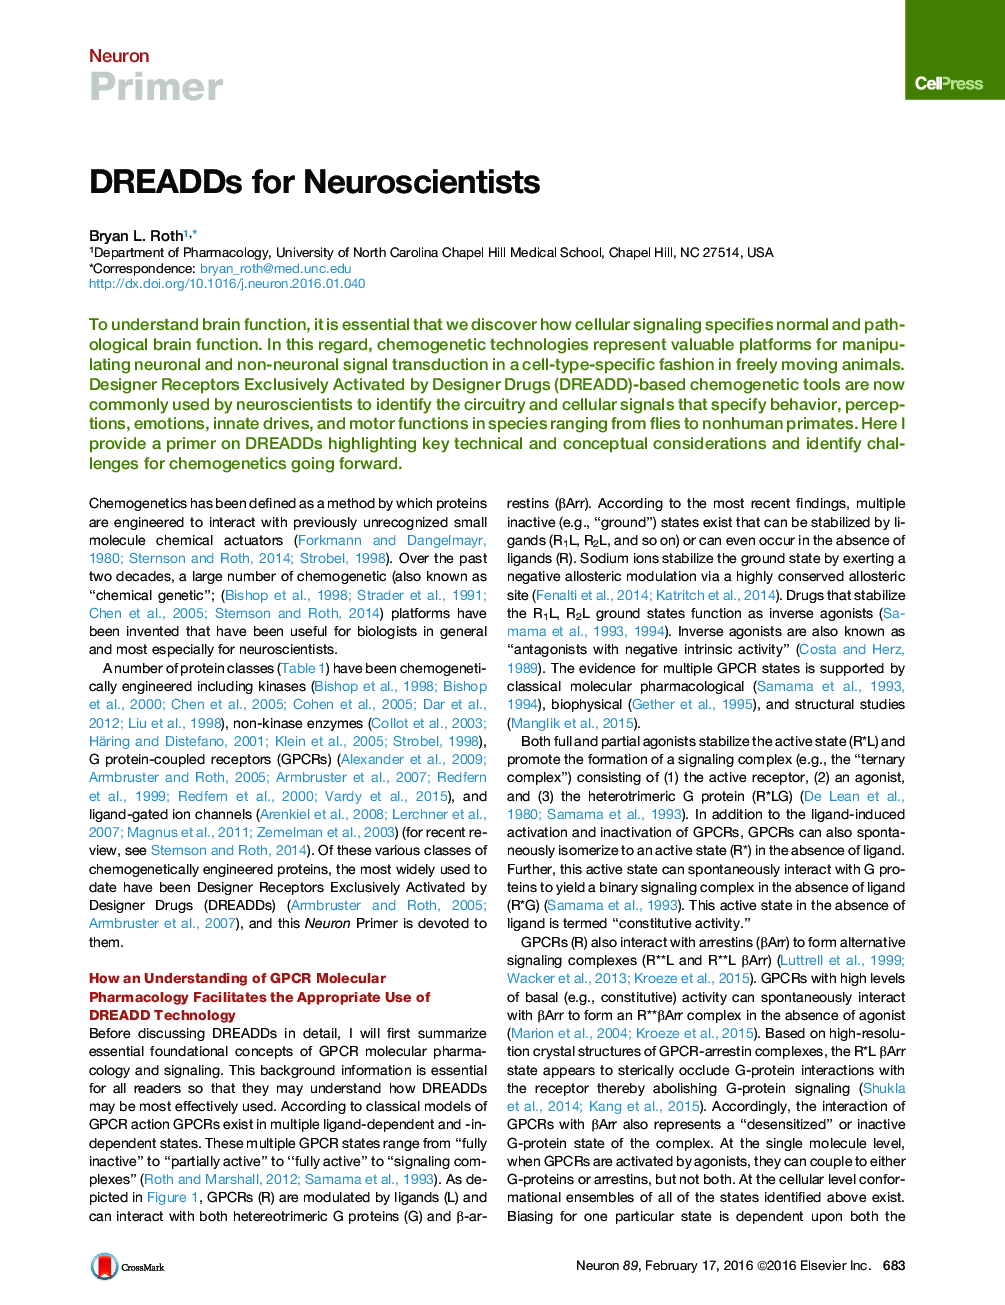 DREADDs for Neuroscientists